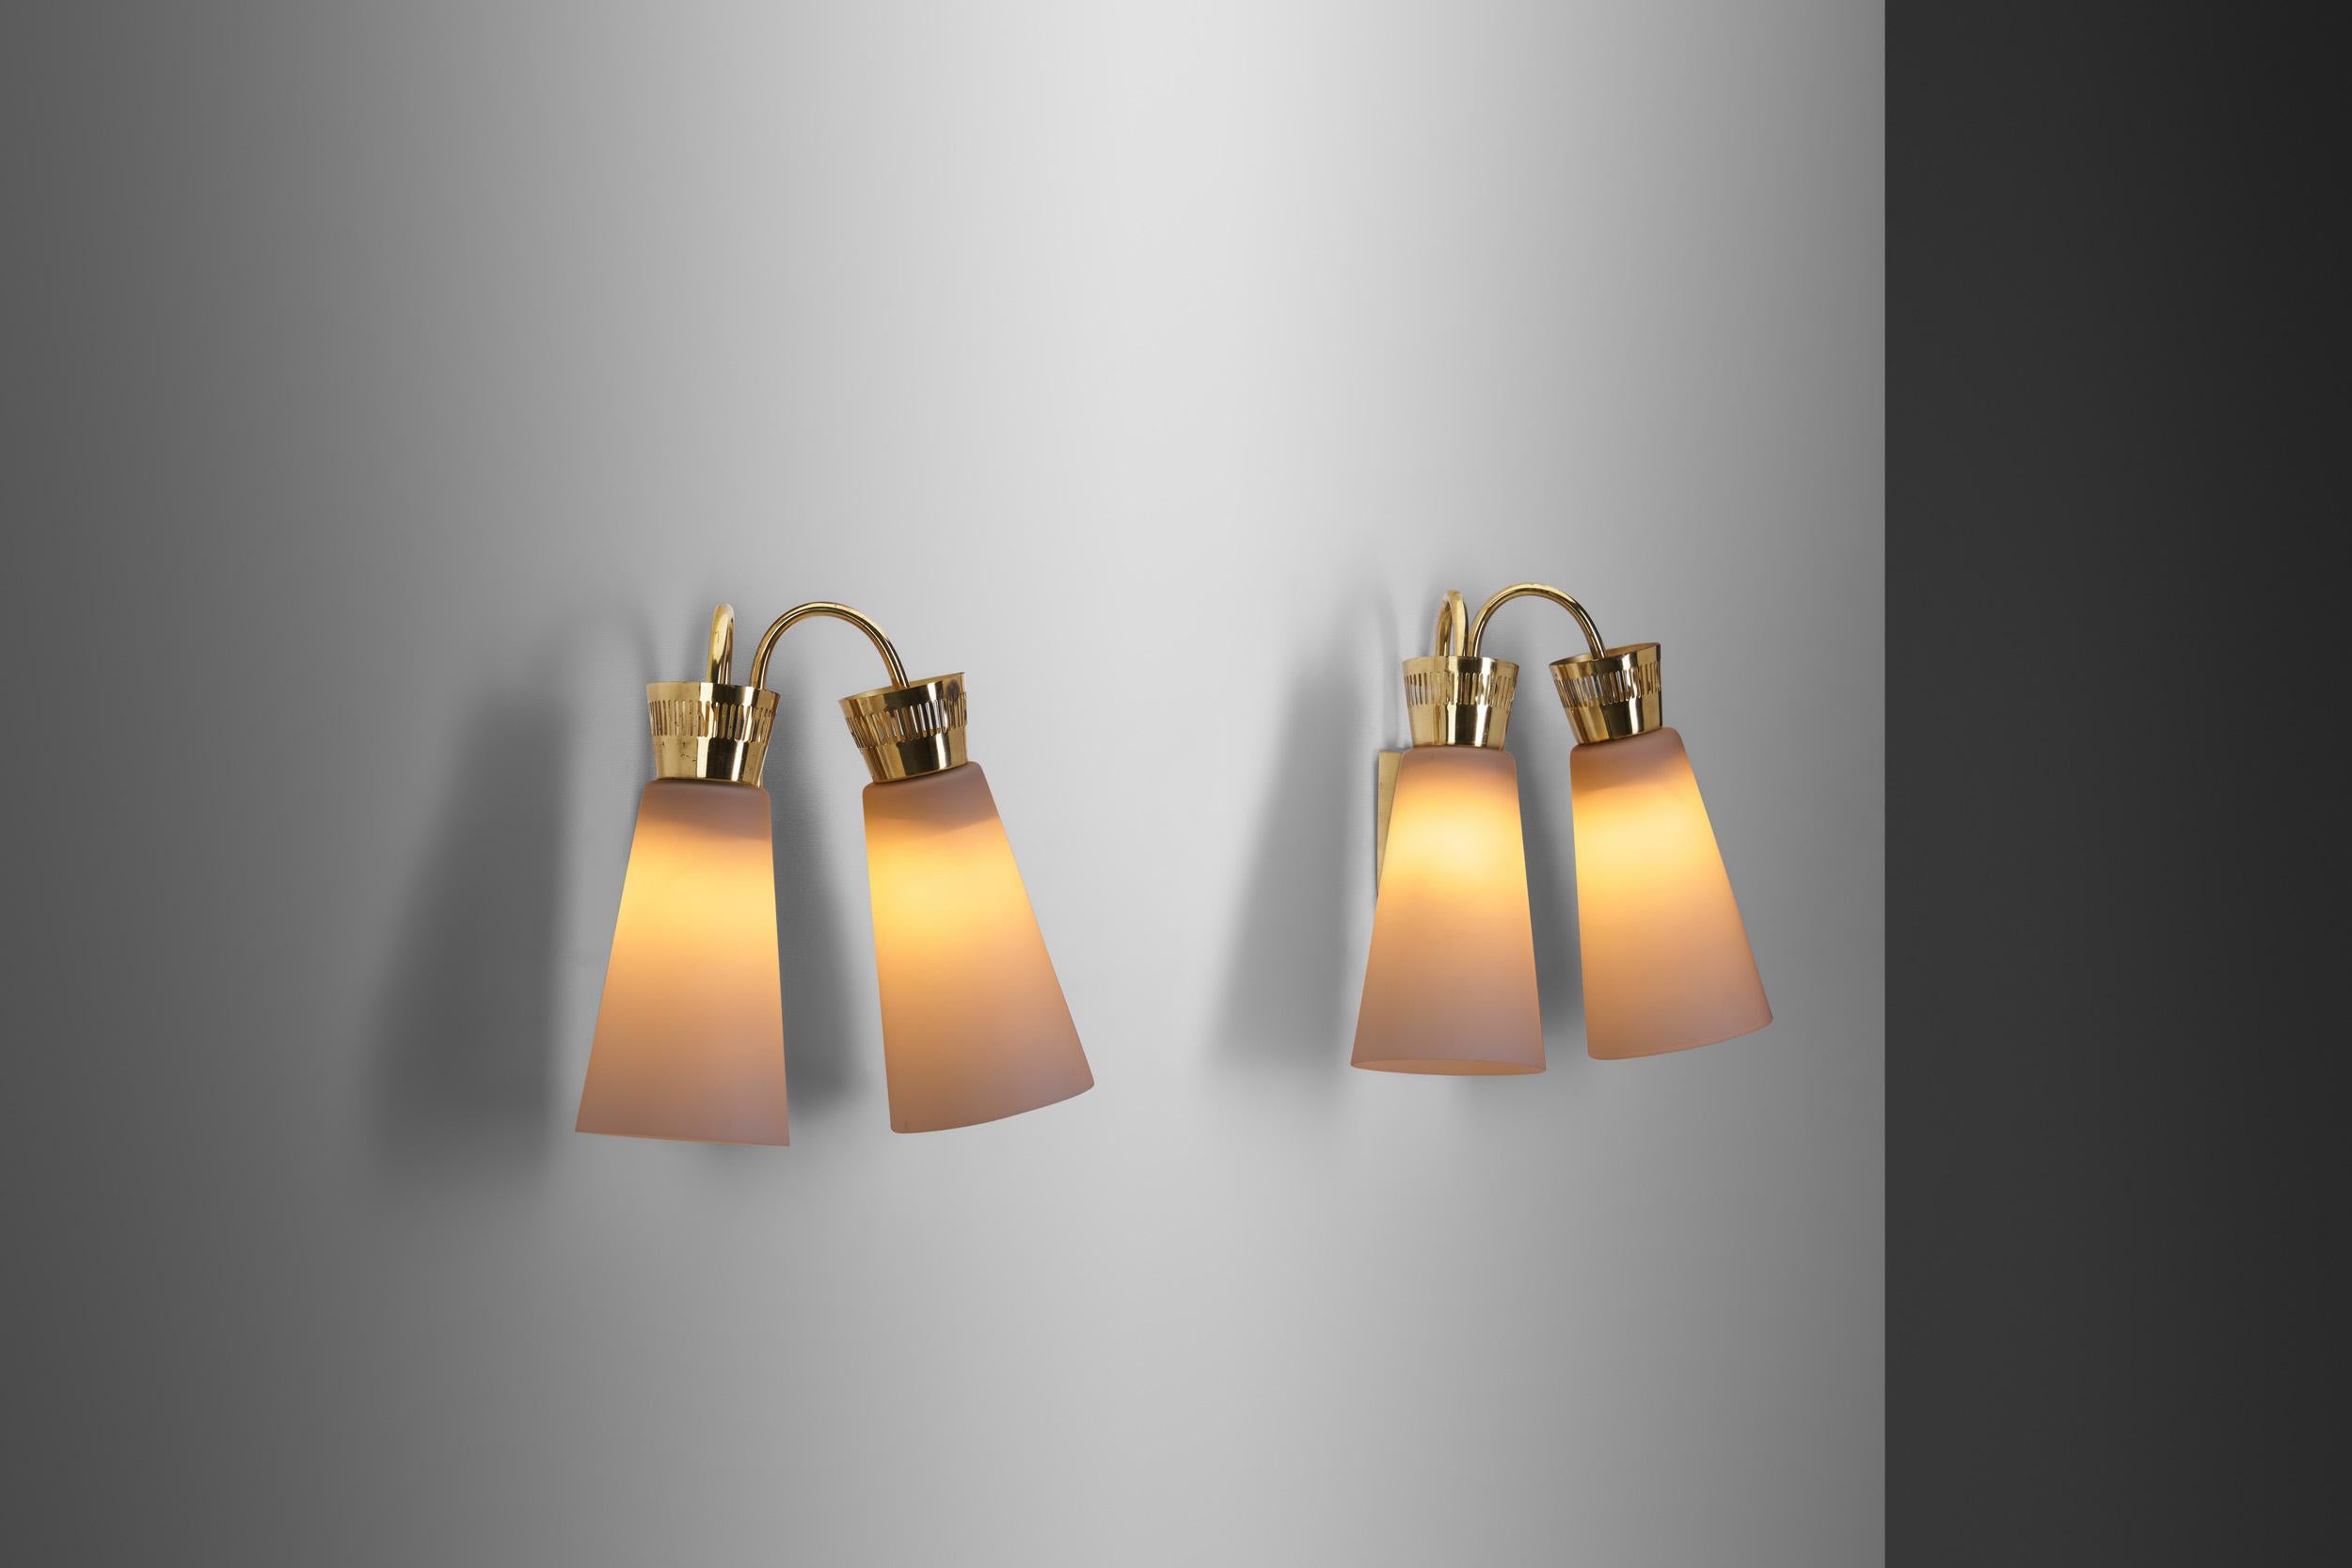 This rare pair of wall lights was designed during the 1950s, an era in which Finland saw the birth of many of its most iconic lighting models. It was a period of consistency, excellence, and sophistication design wise. Itsu, short for Itä-Suomen